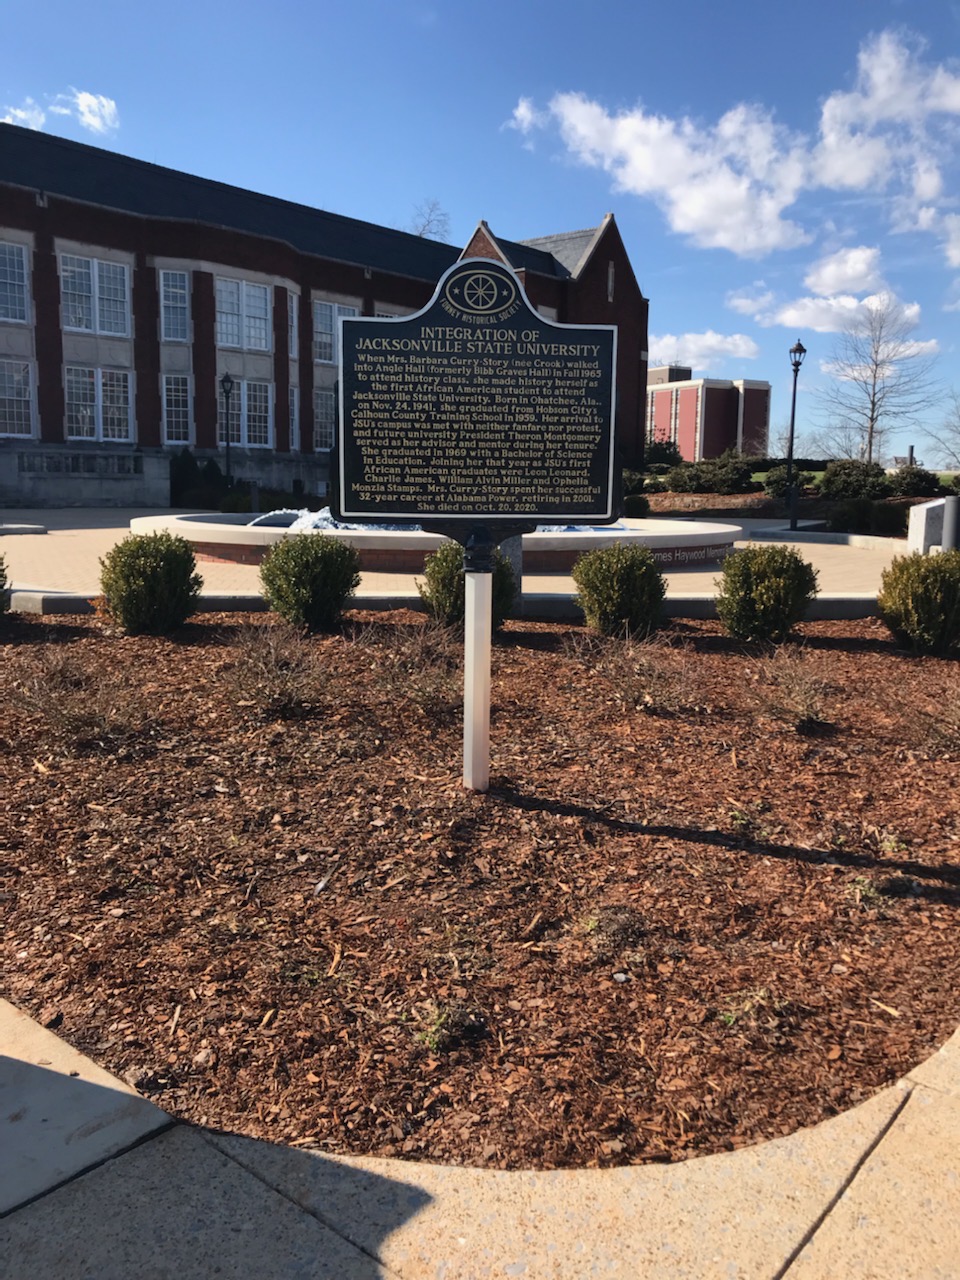 A historic marker commemorating the integration of JSU is installed in front of Angle Hall.